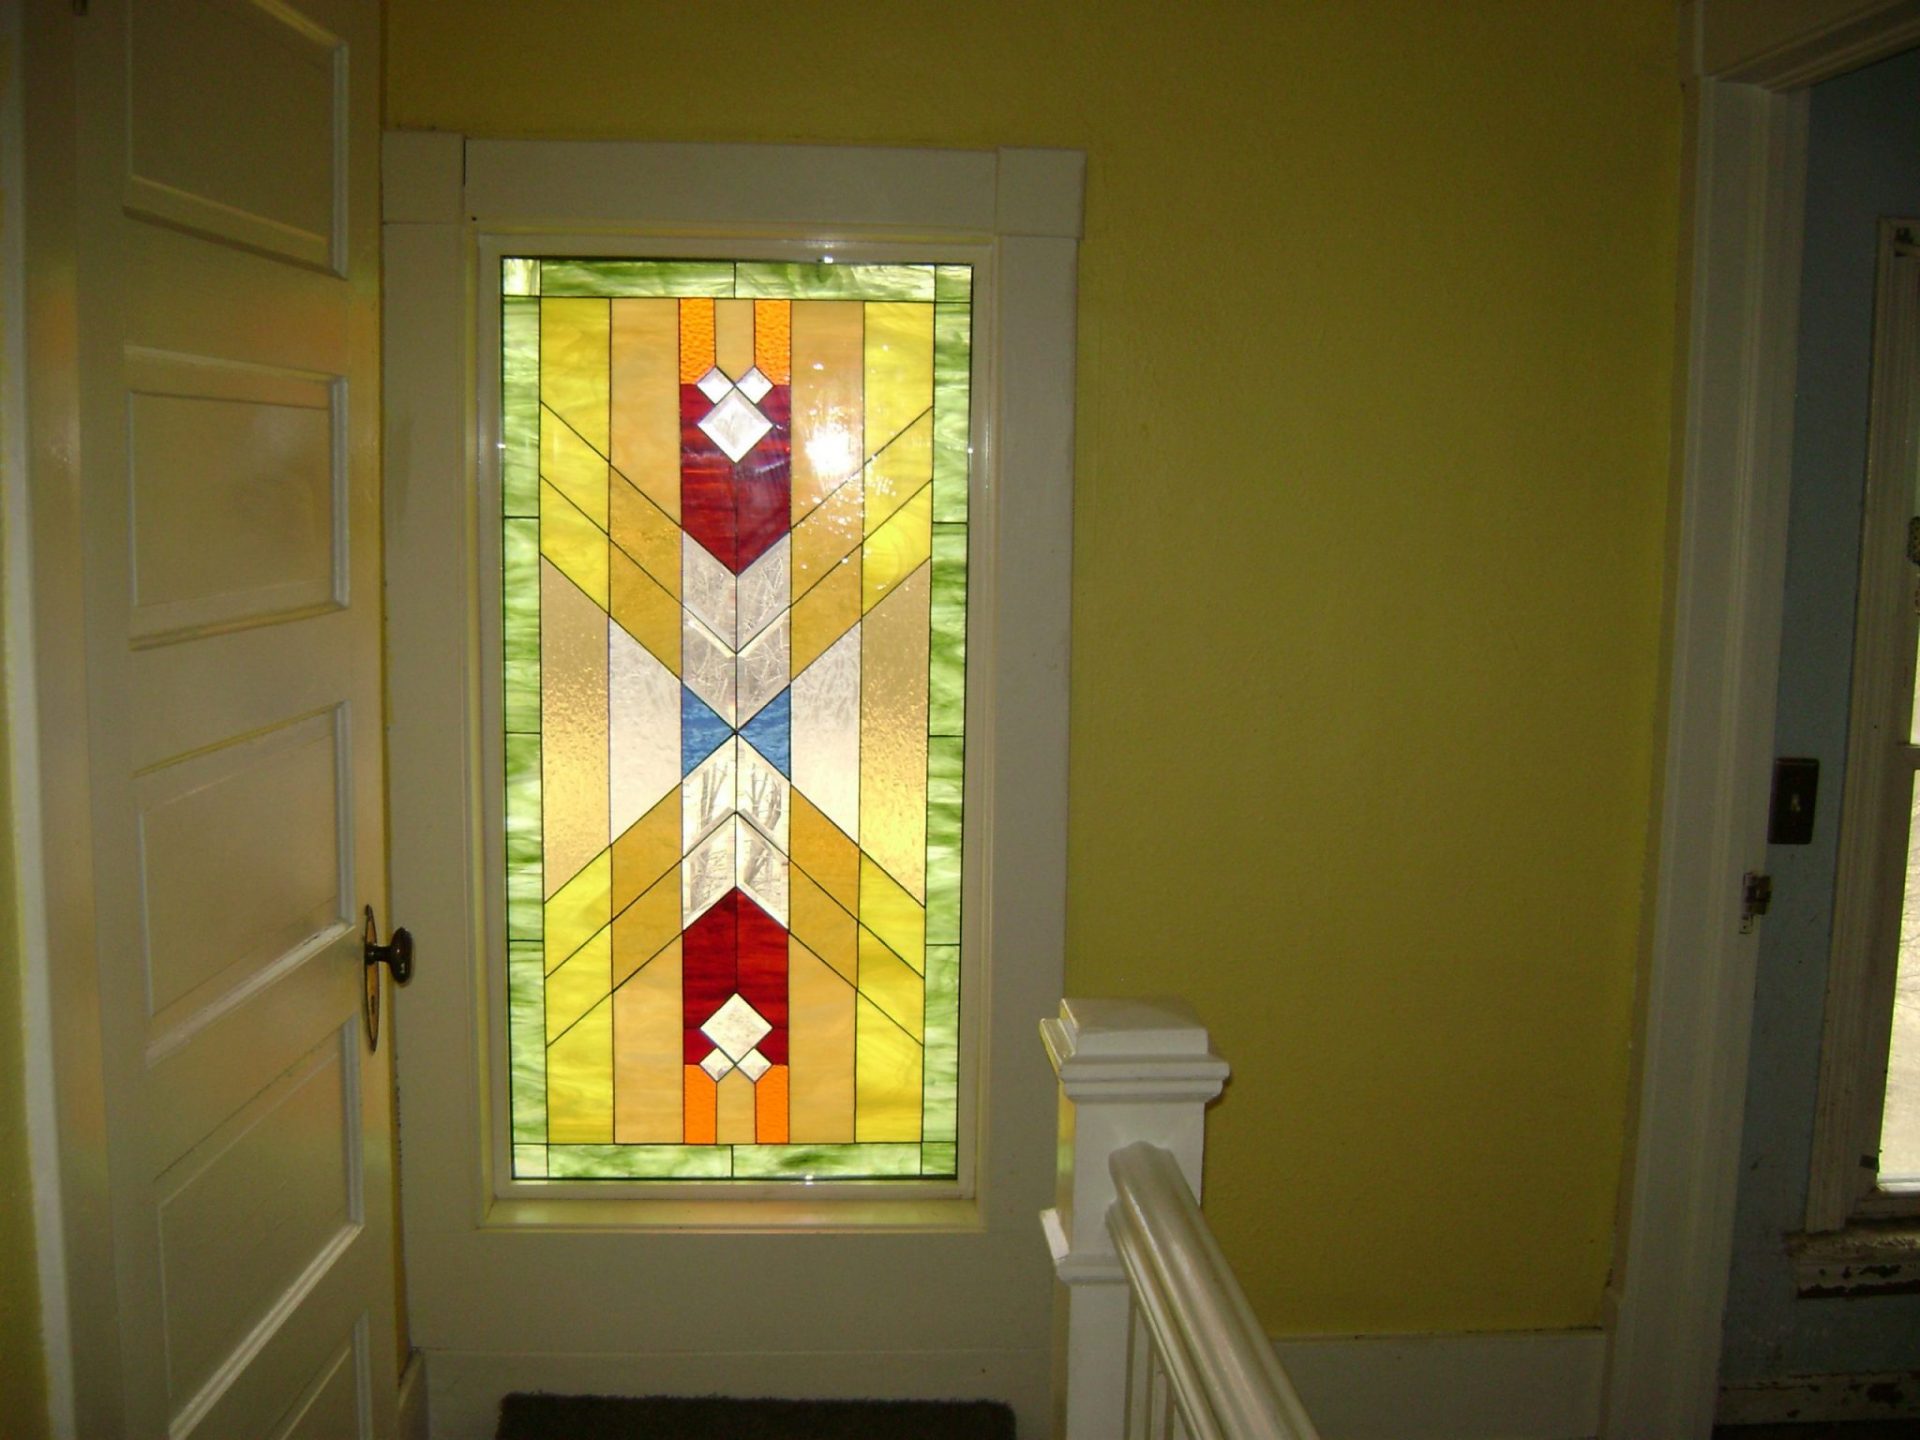 Stained glass insert simply trimmed in over existing window